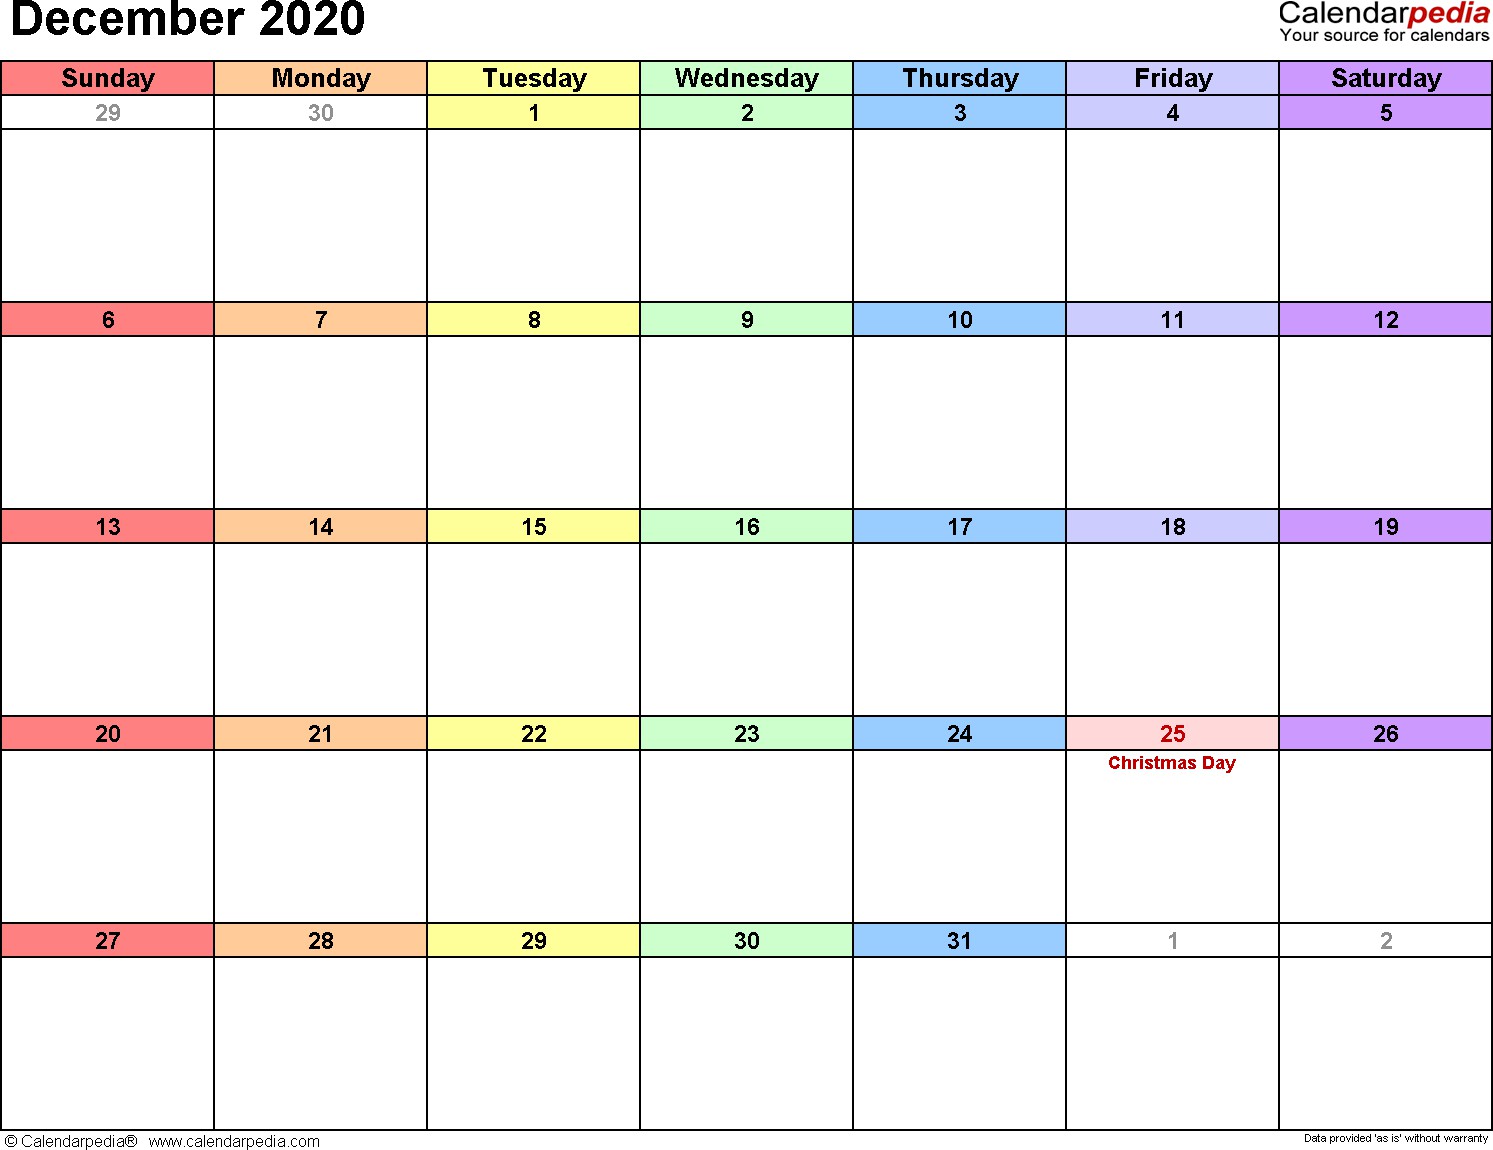 december 2020 calendars for word excel and pdf